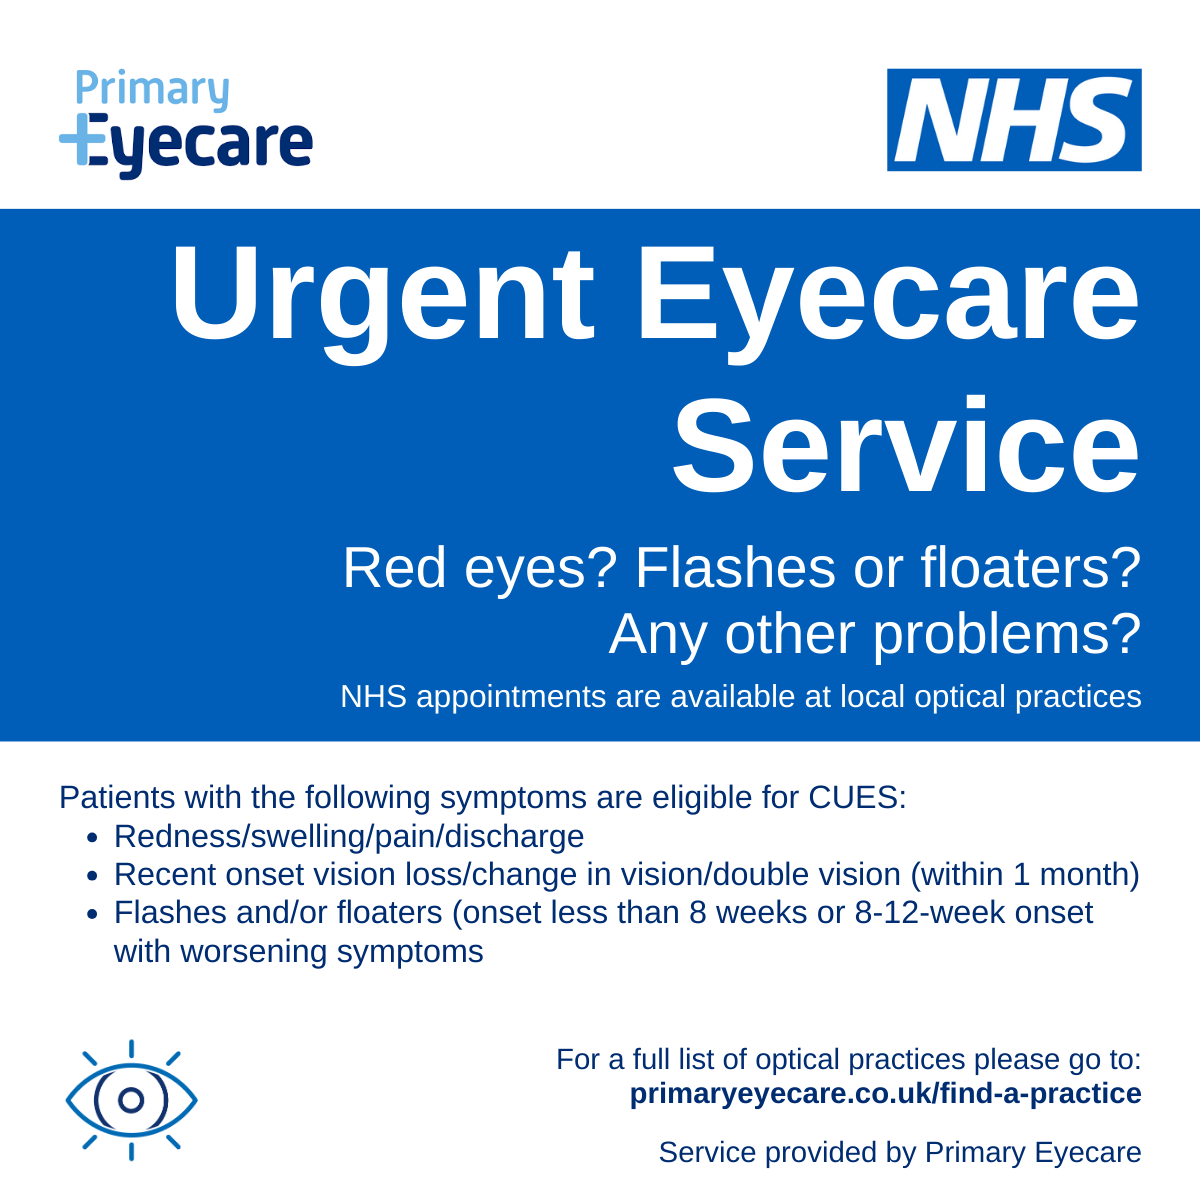 Urgent Eyecare Service. Red eyes? Flashes or floaters? Any other problems? NHS appointments are available at local optical practices. 